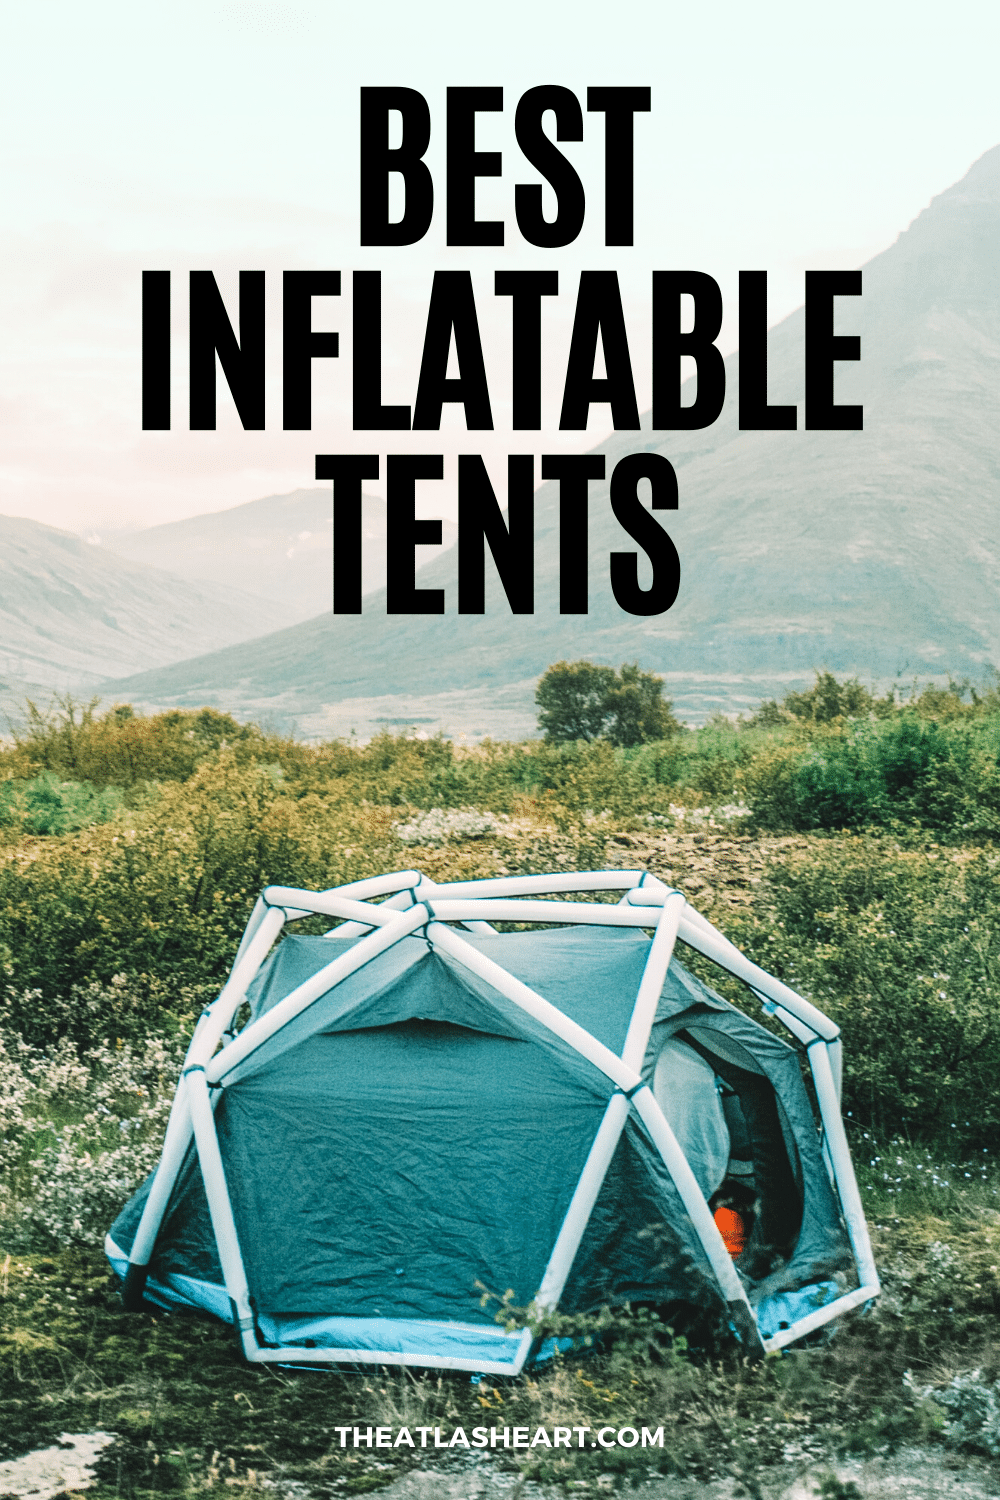 12 Best Inflatable Tents to Make Camping Easier in 2022